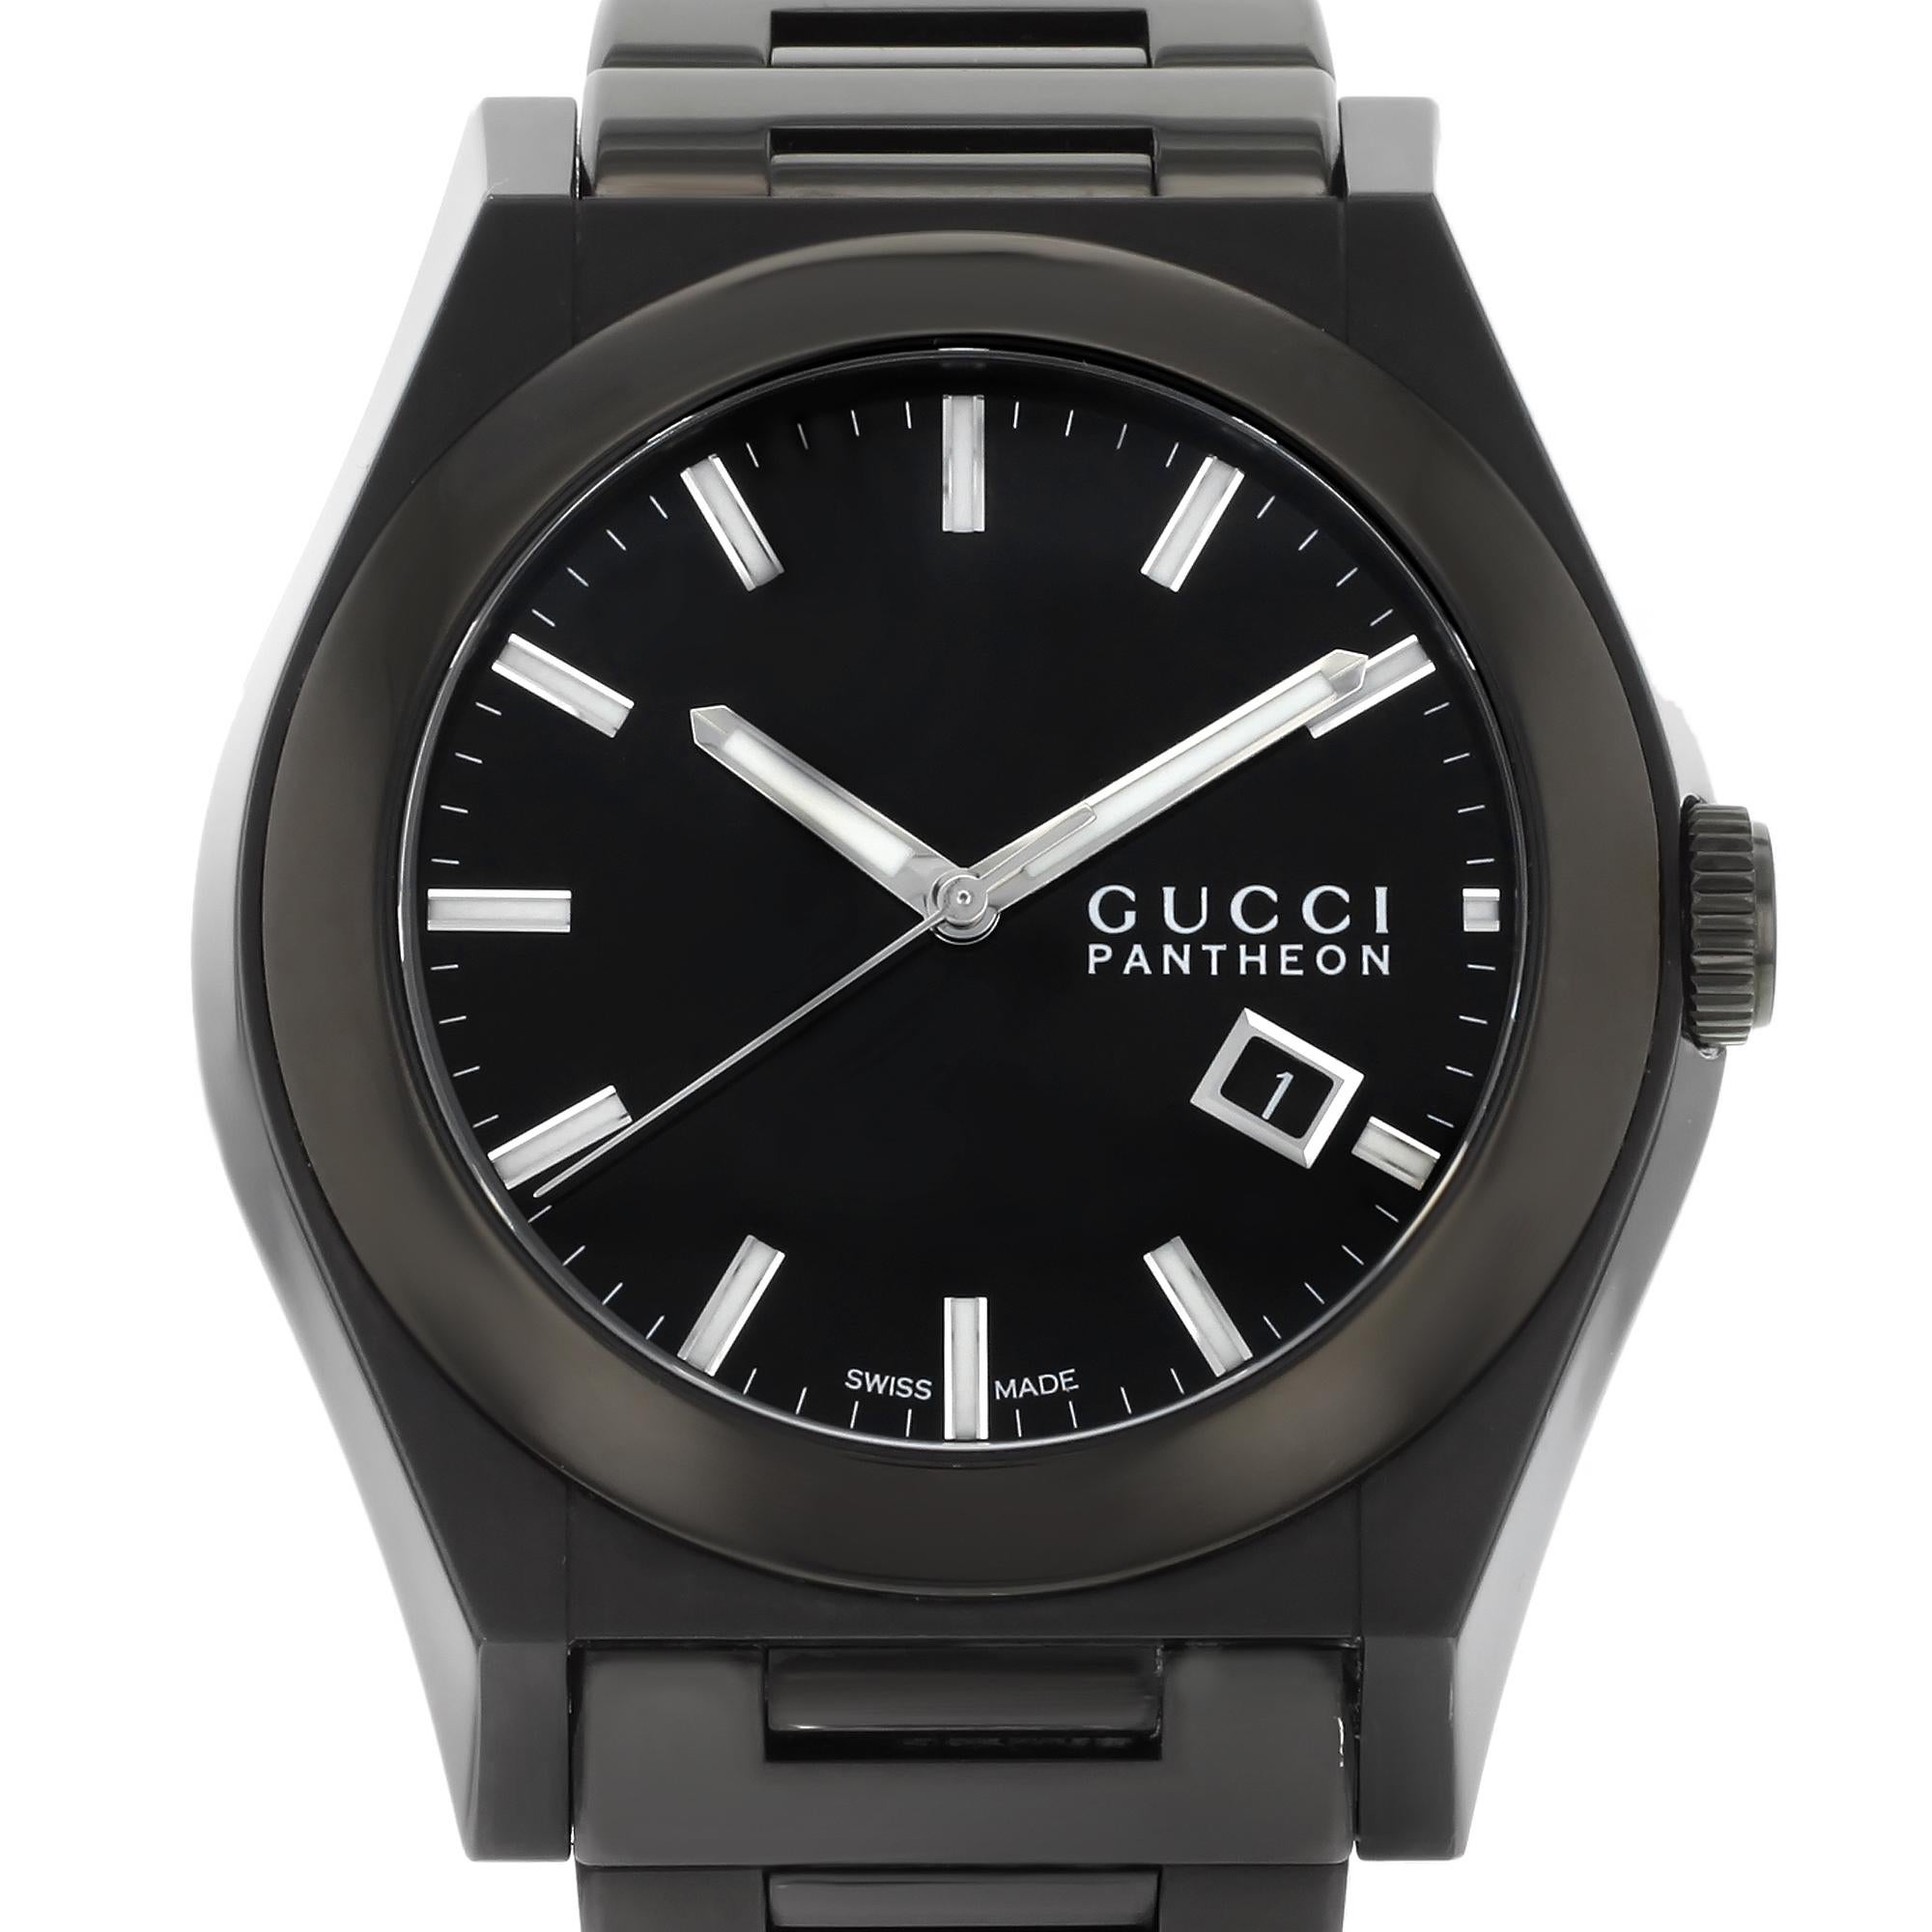 This display model Gucci Pantheon YA115244 is a beautiful men's timepiece that is powered by quartz (battery) movement which is cased in a stainless steel case. It has a round shape face, date indicator dial and has hand sticks style markers. It is